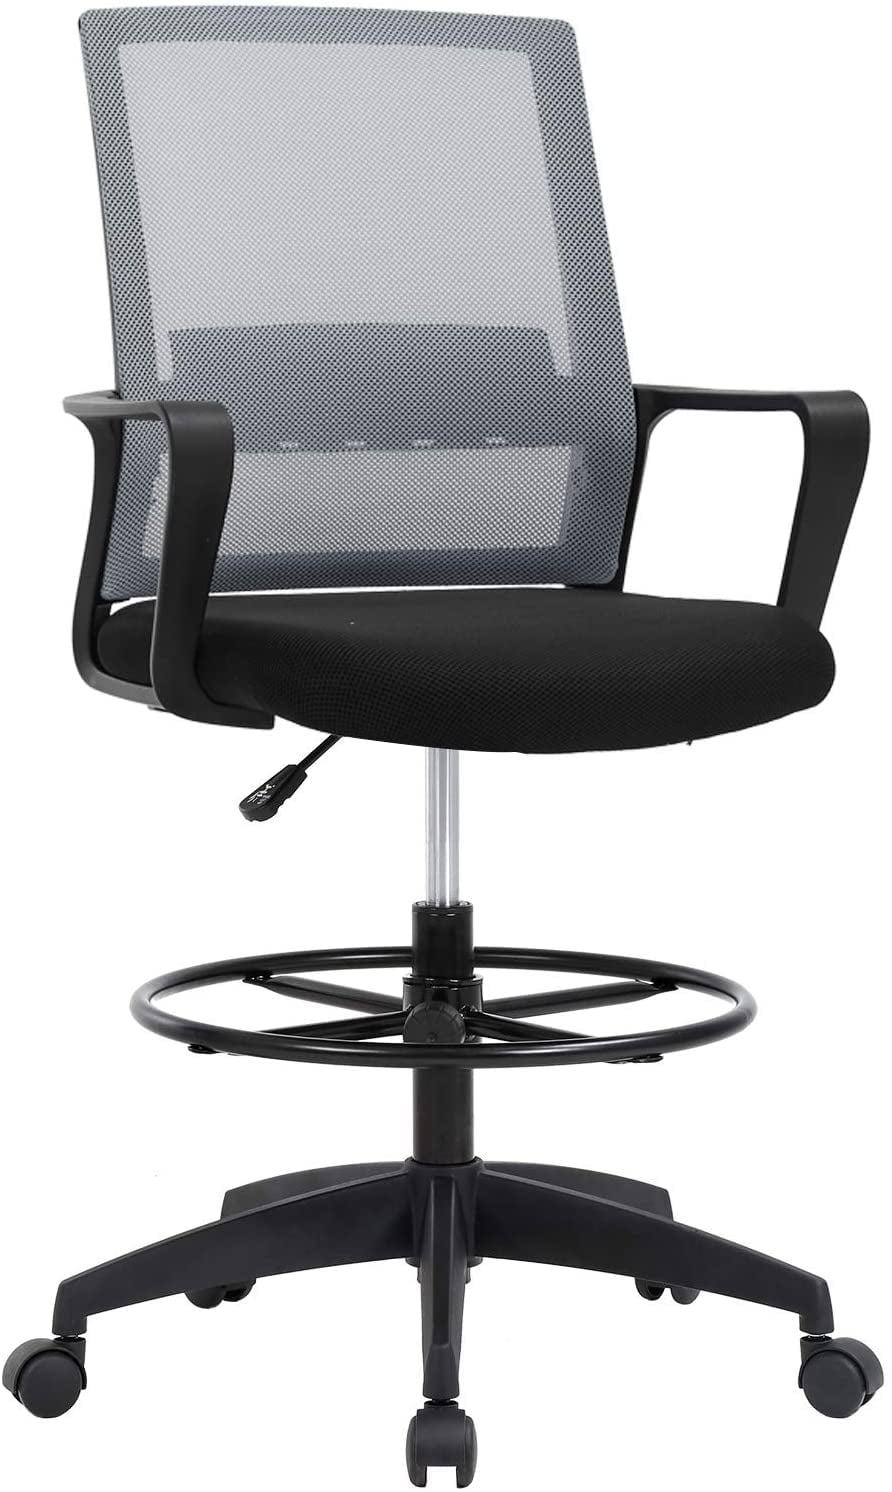 Black Drafting Chair Stool Office Ergonomic Footrest Leather Tall Arms Footrest Height Adjustable Ribbed Mid-Back Tilt-Tension Control Rocker Lumbar Support Swivel Rolling Cushioned 400lb BIFMA 